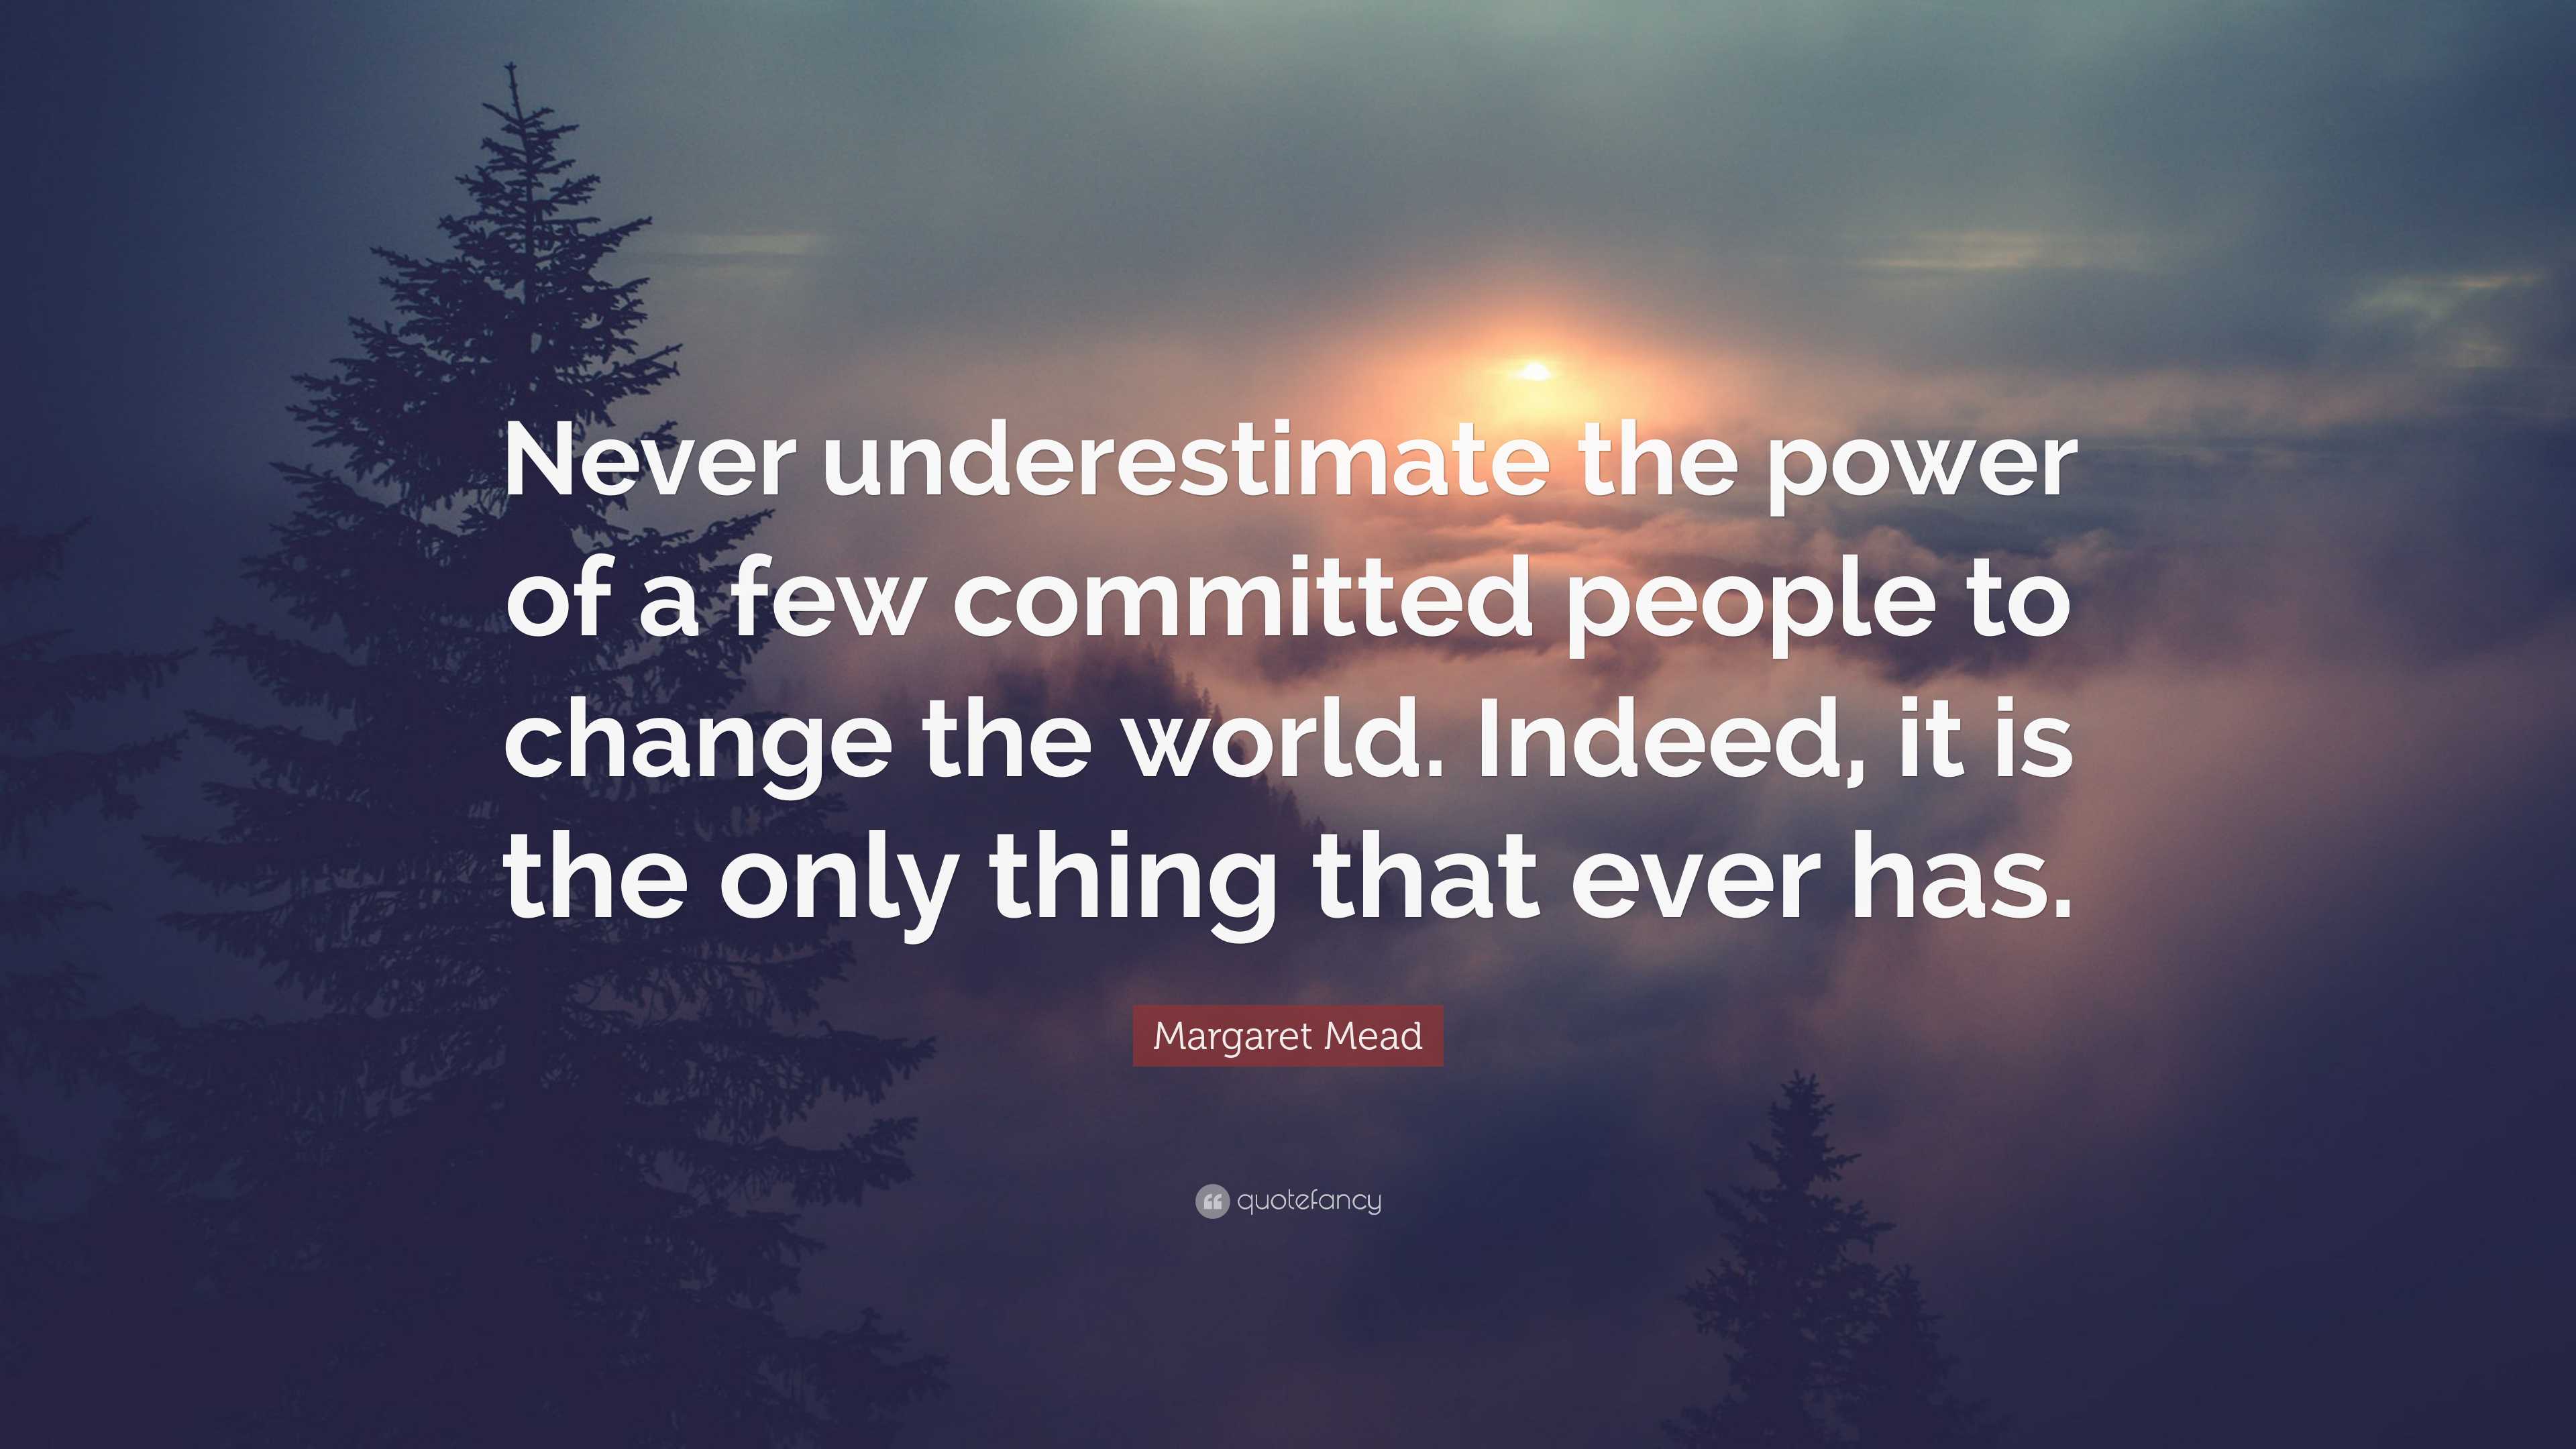 Margaret Mead Quote: “Never underestimate the power of a few committed ...